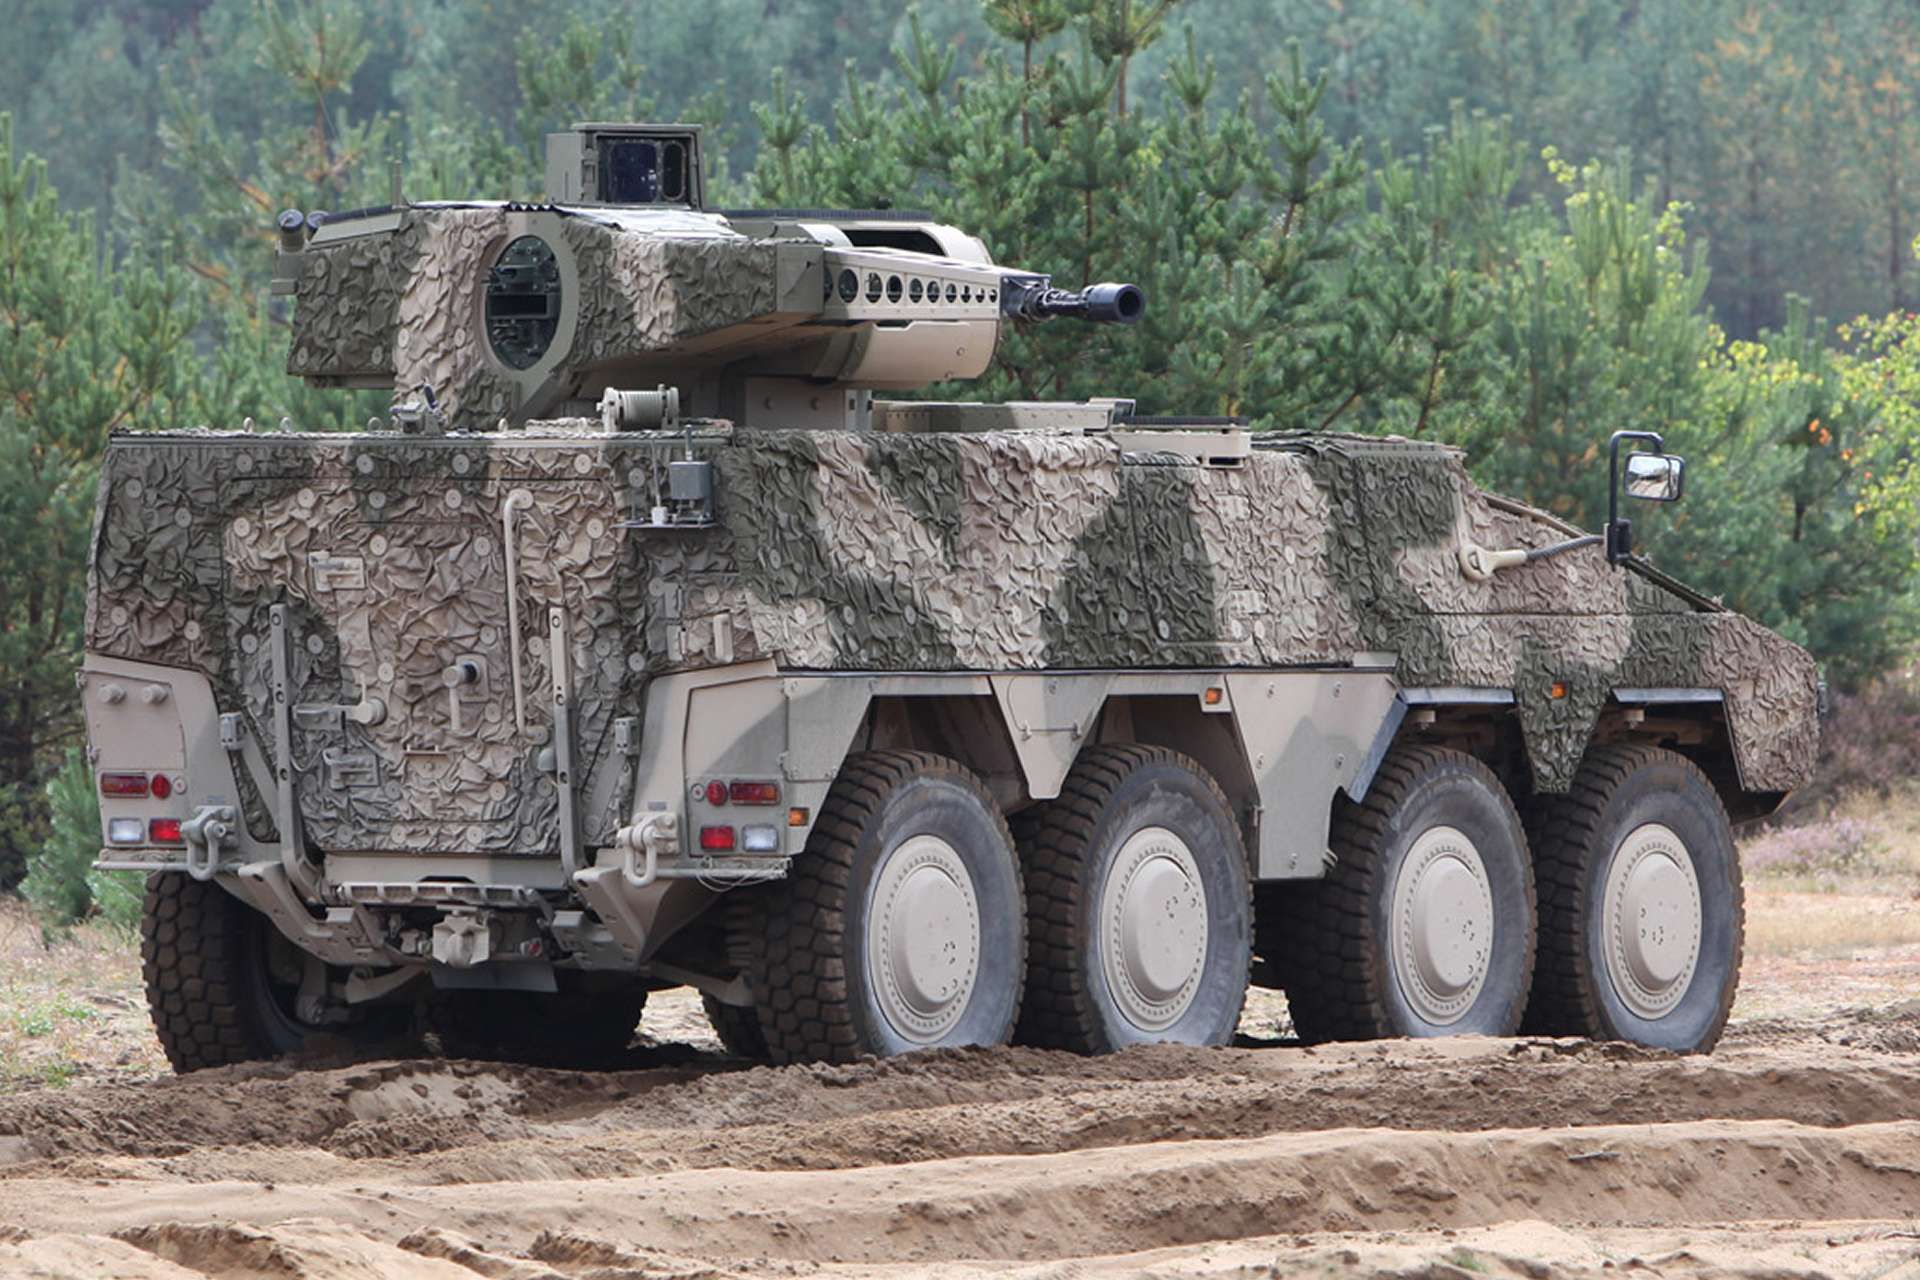 German%20Army%20to%20acquire%20148%20Boxer%20RCT30%20IFVs%20equipped%20with%20SPz%20Puma%20turrets%20925%20003-30a081fc.jpeg